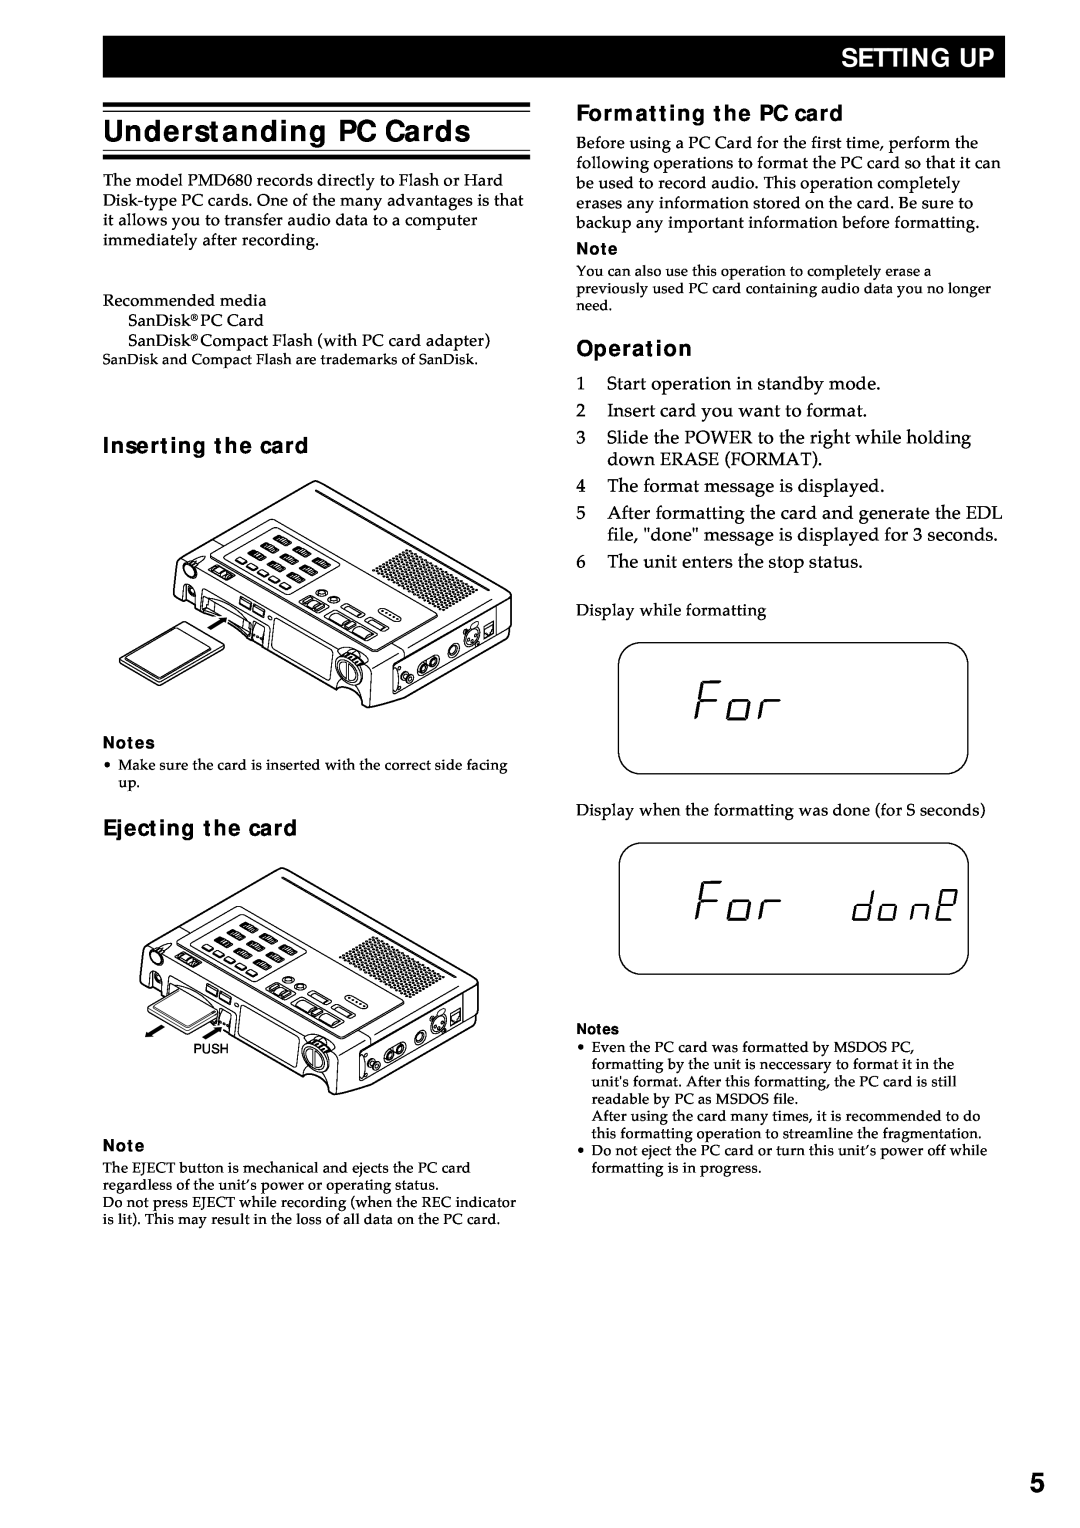 Marantz PMD680 manual Understanding PC Cards, Setting Up, Inserting the card, Formatting the PC card, Operation 